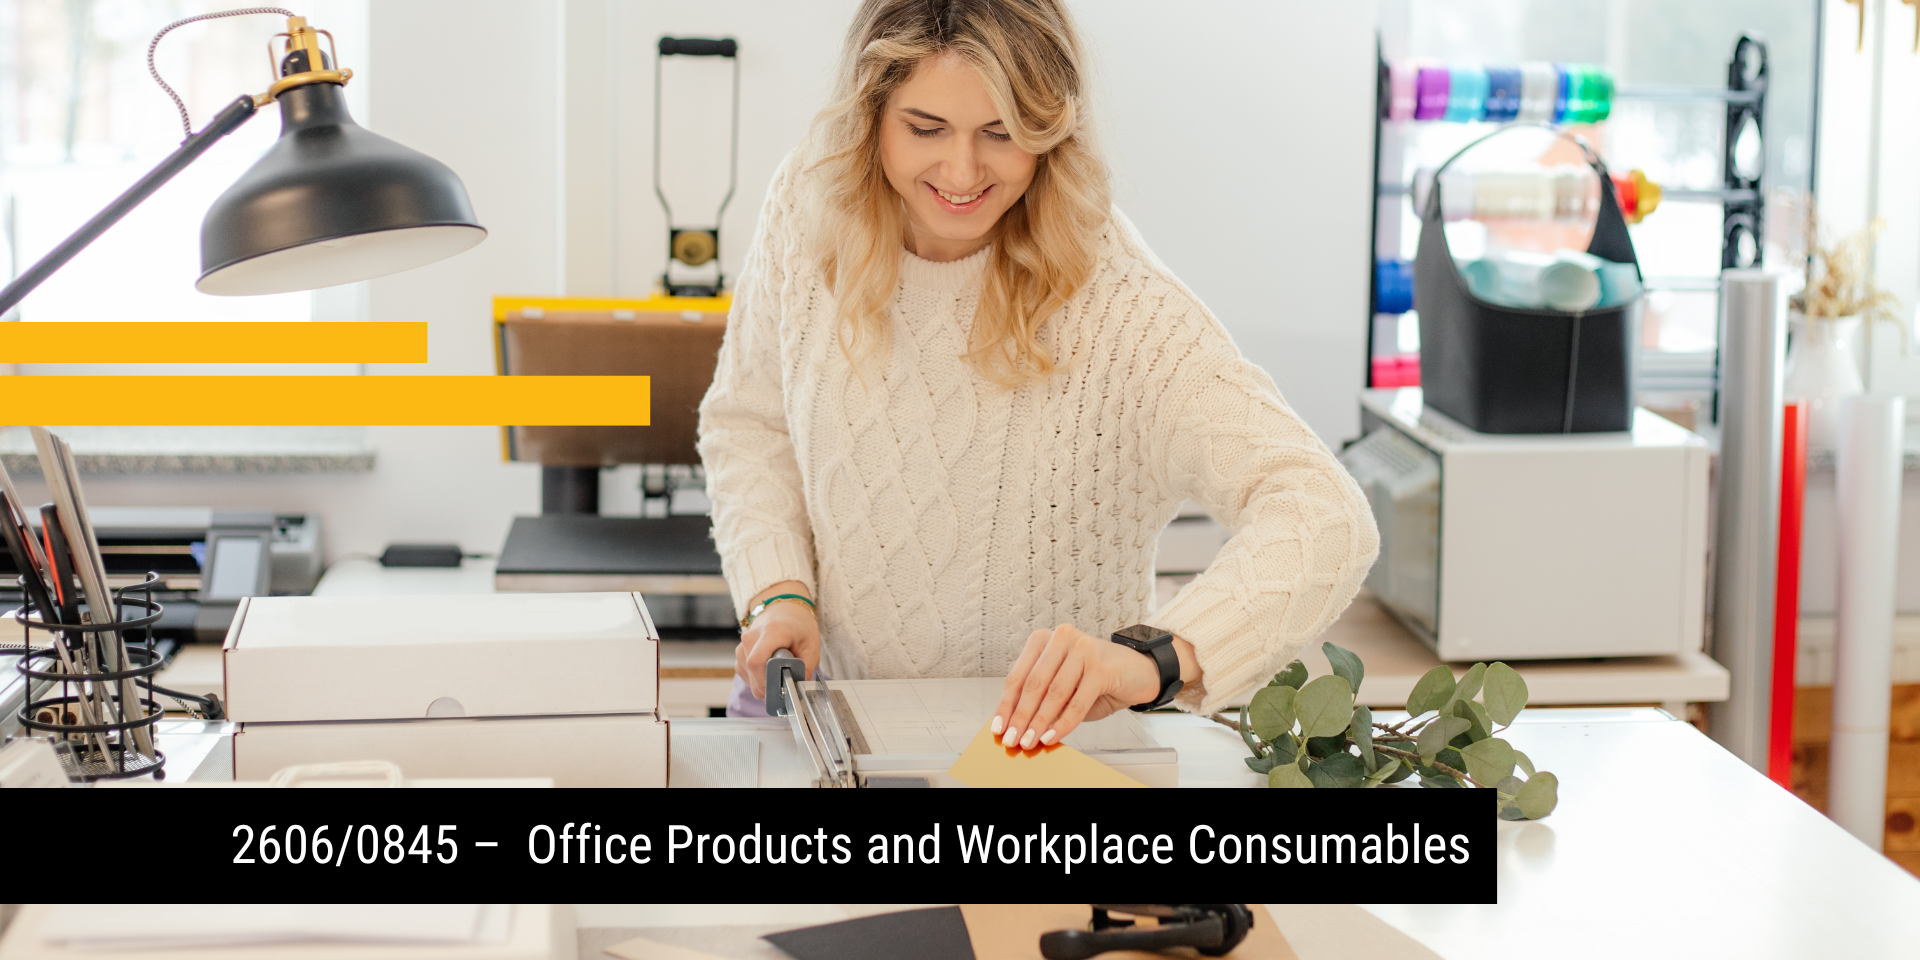 New Contract: 2606/0845 – Office Products and Workplace Consumables